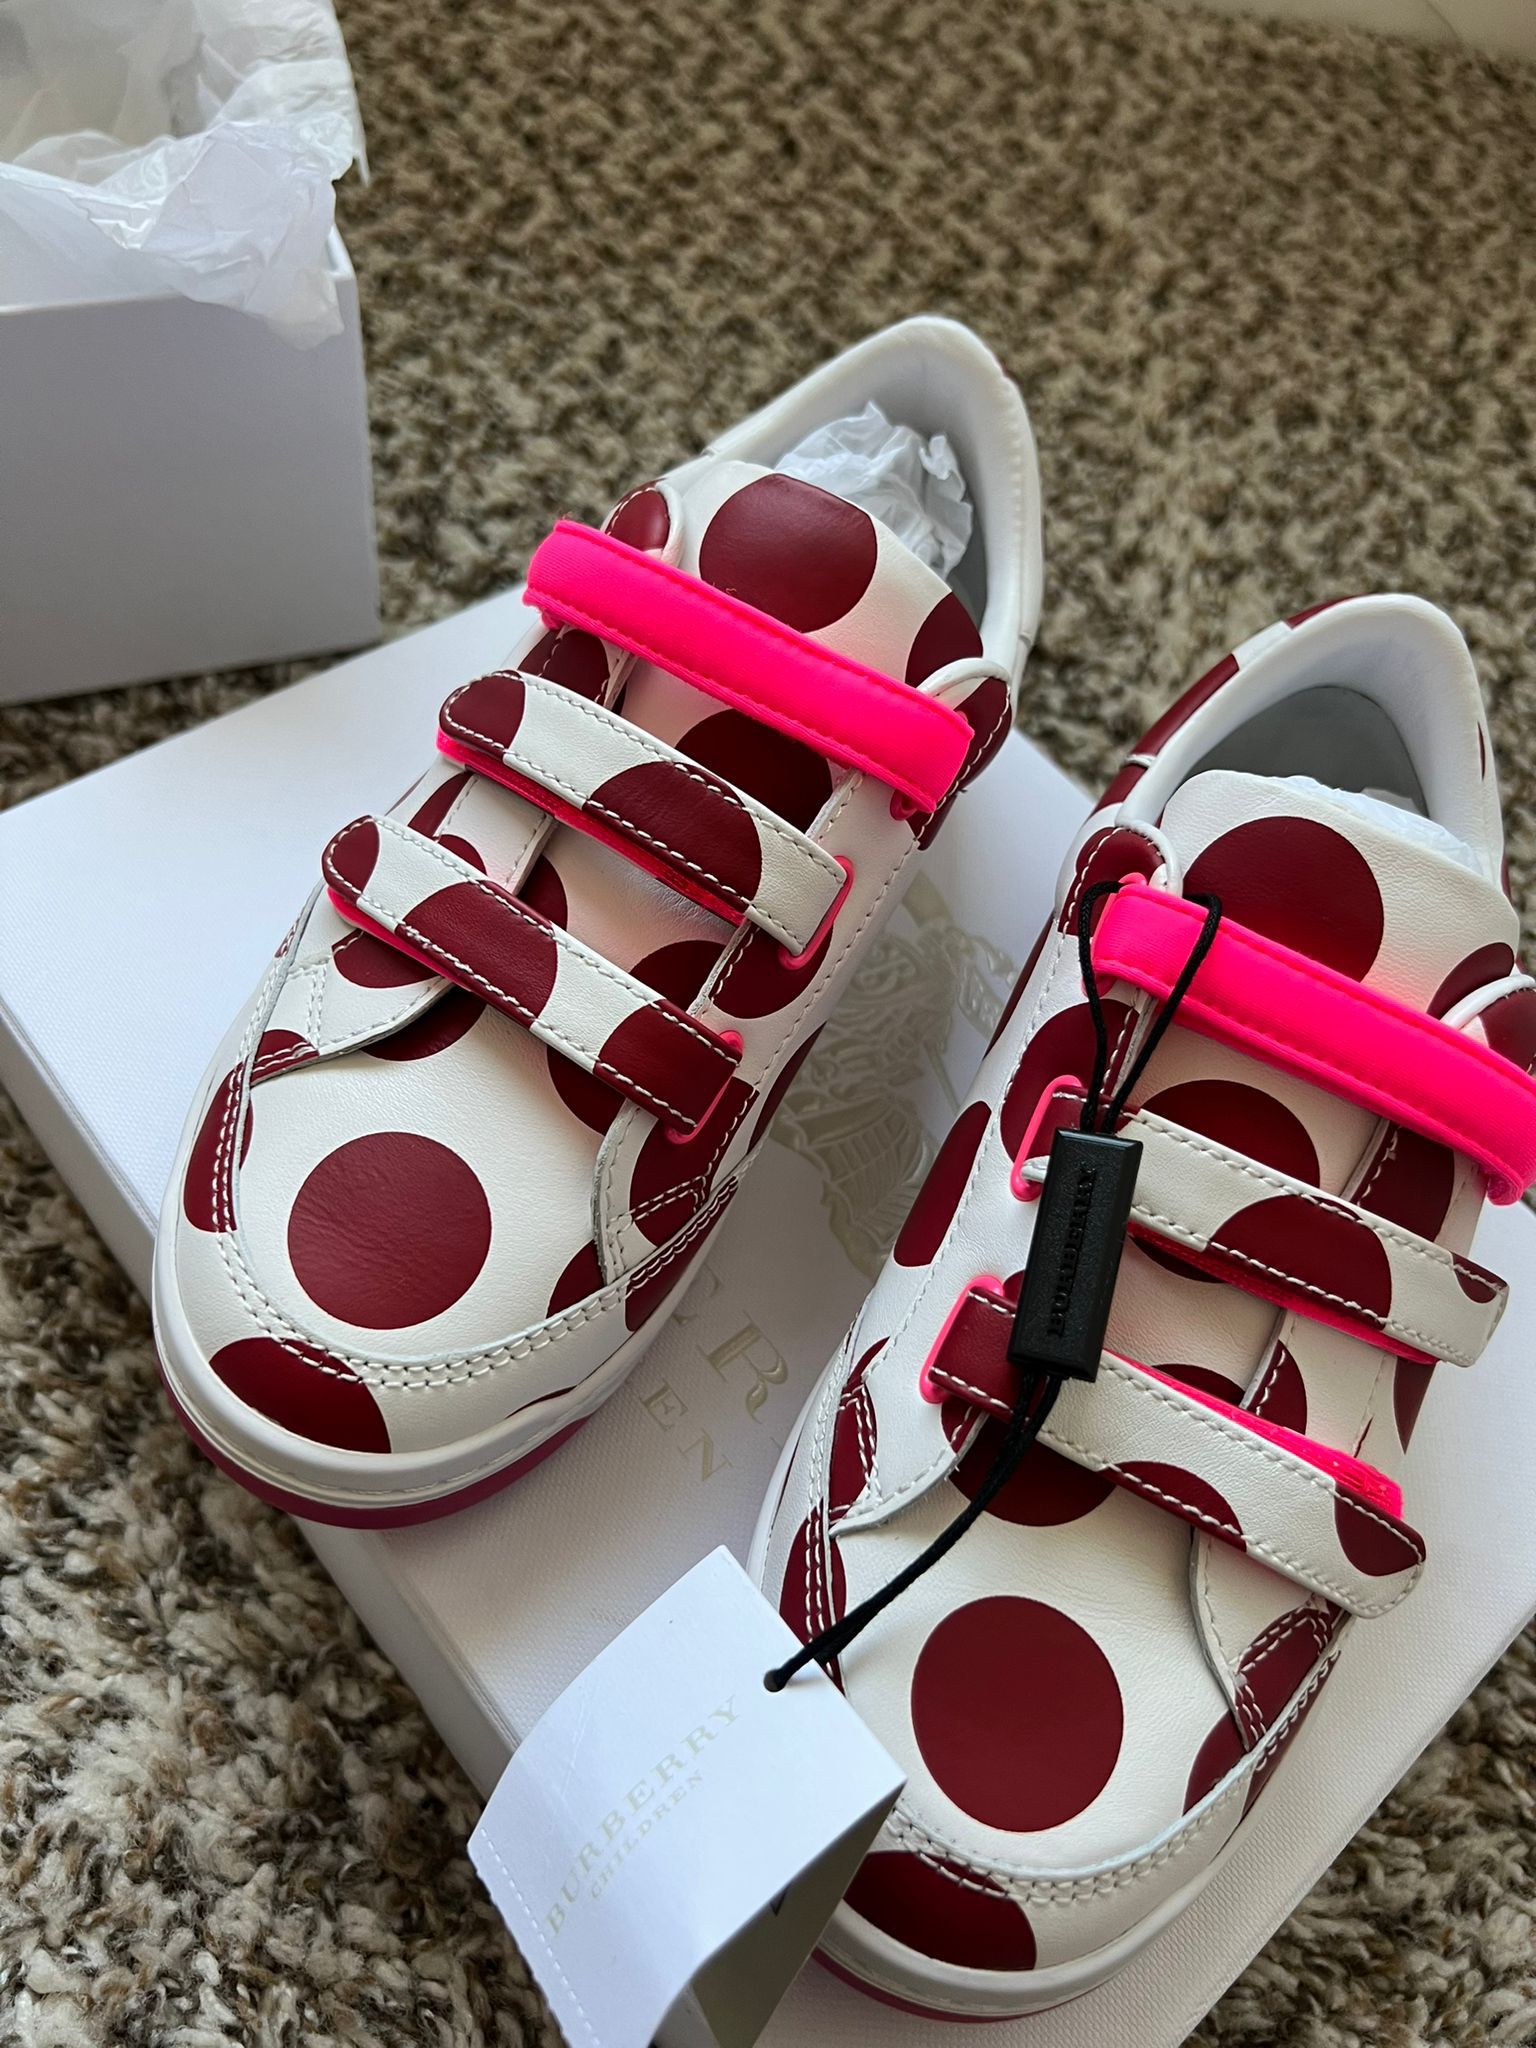 NEW AUTHENTIC BURBERRY KIDS SNEAKERS SIZE 32 And 33 -$125 Each